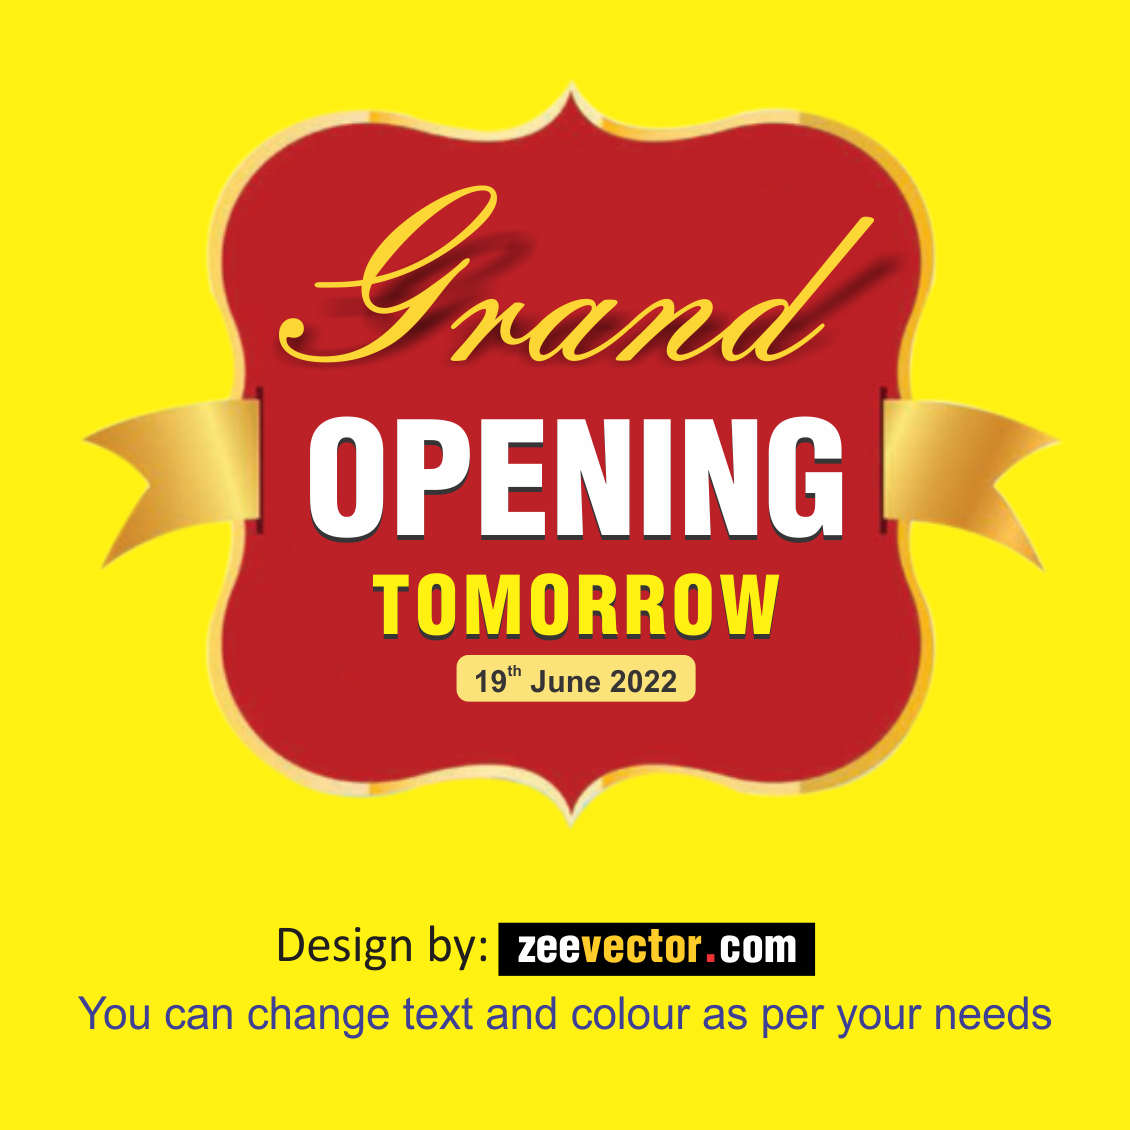 Grand Opening Ceremony invitation card template. 19626506 Vector